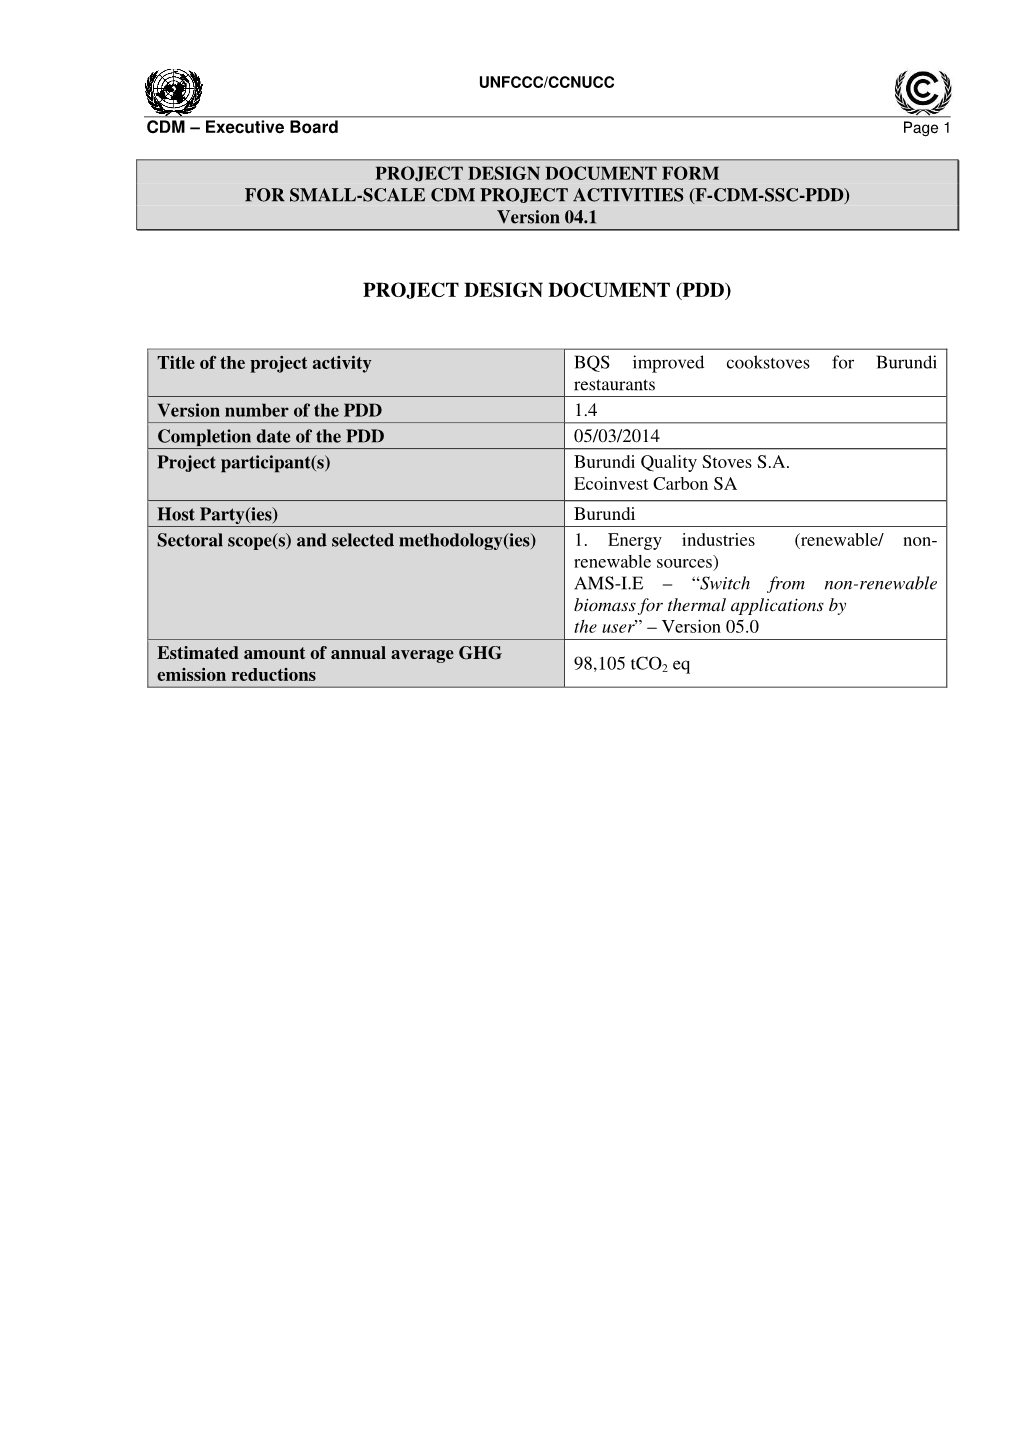 PROJECT DESIGN DOCUMENT FORM for SMALL-SCALE CDM PROJECT ACTIVITIES (F-CDM-SSC-PDD) Version 04.1